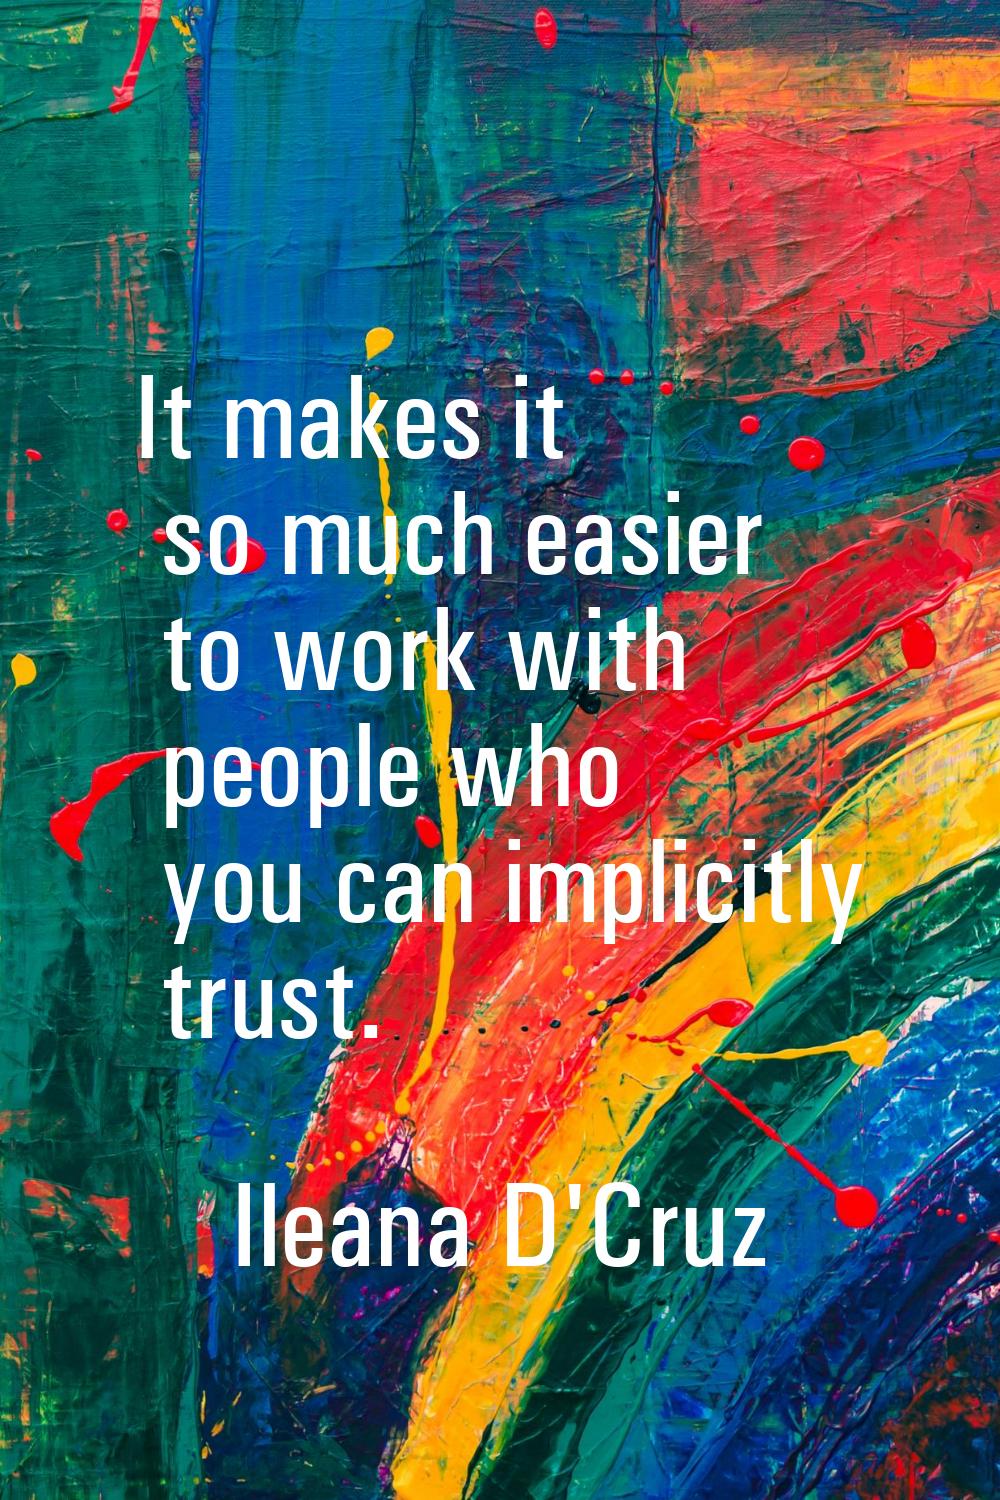 It makes it so much easier to work with people who you can implicitly trust.